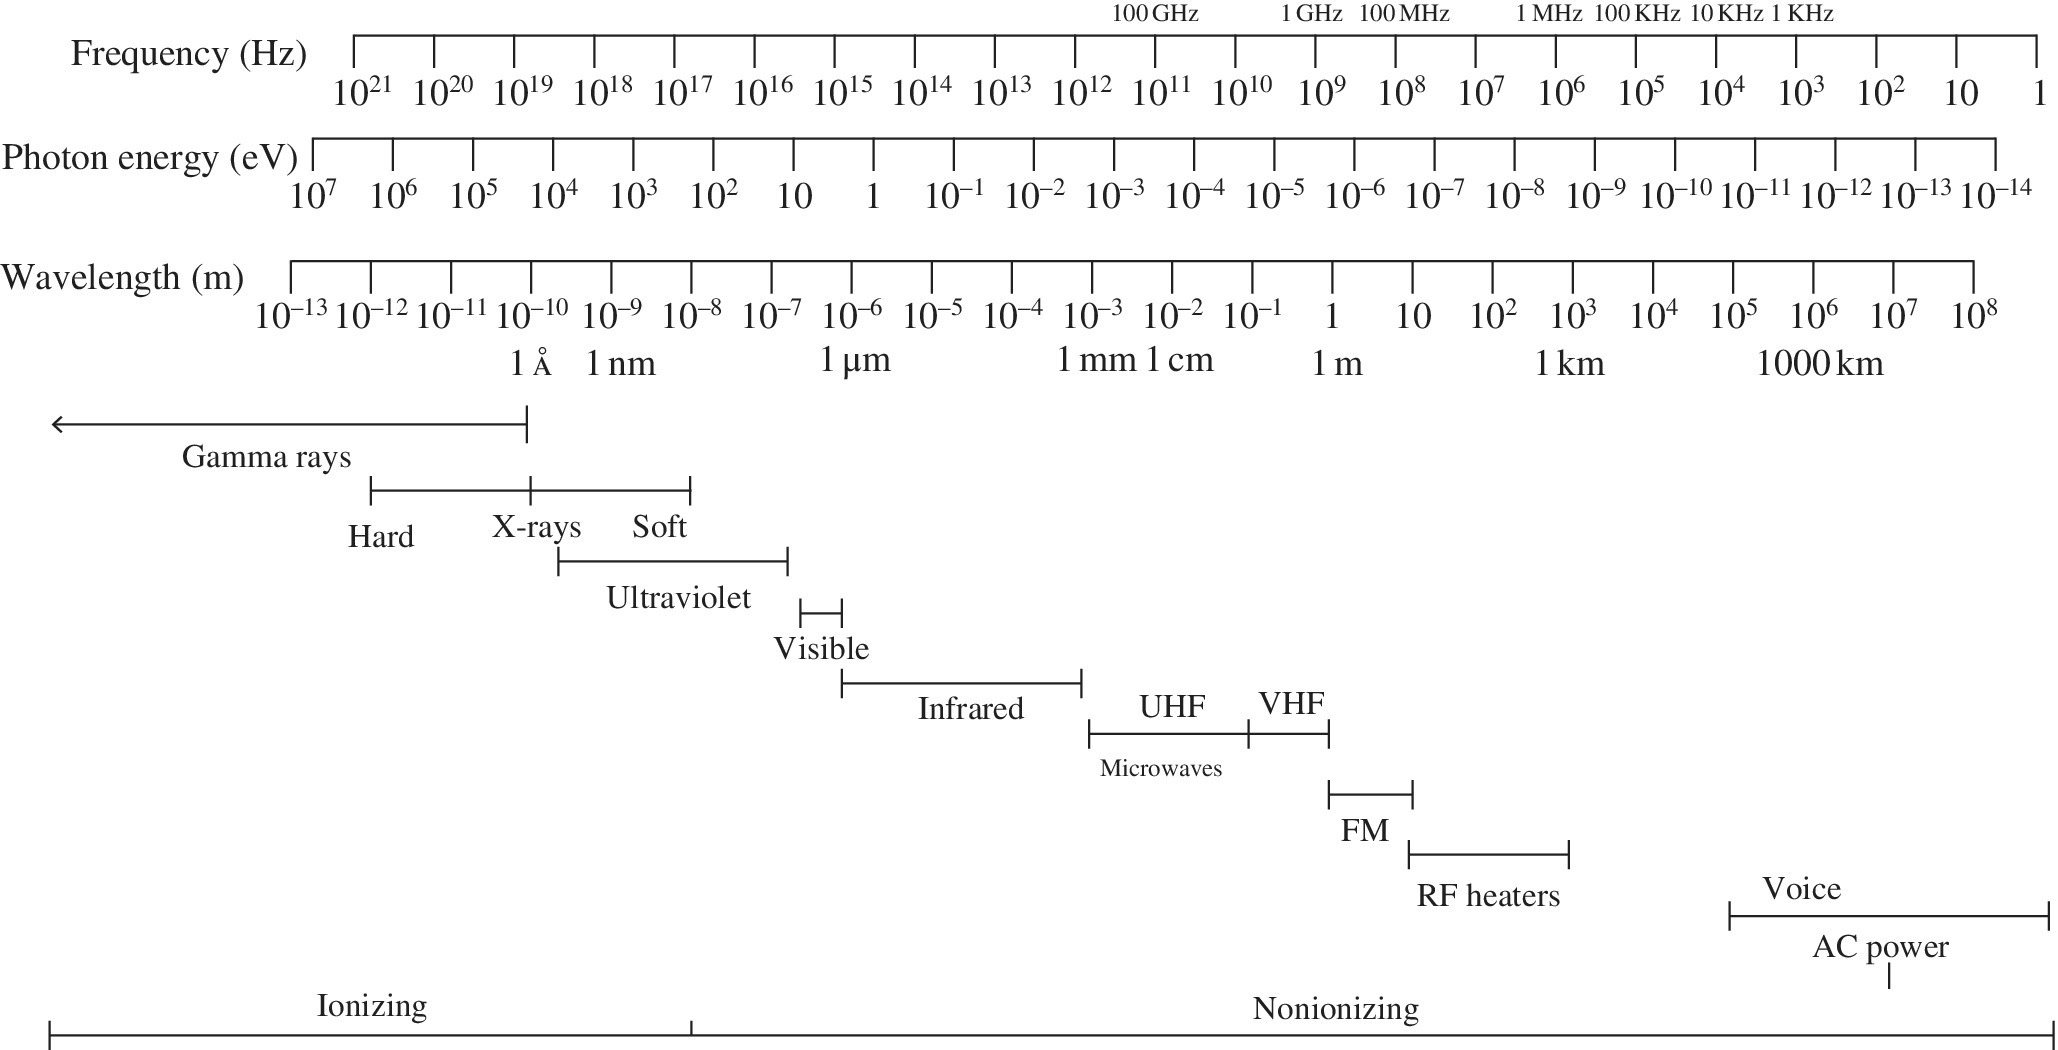 Schematic diagram of the electromagnetic spectrum displaying which types are ionizing and nonionizing. Atop are number lines for frequency (Hz), photon energy (eV), and wavelength (m).